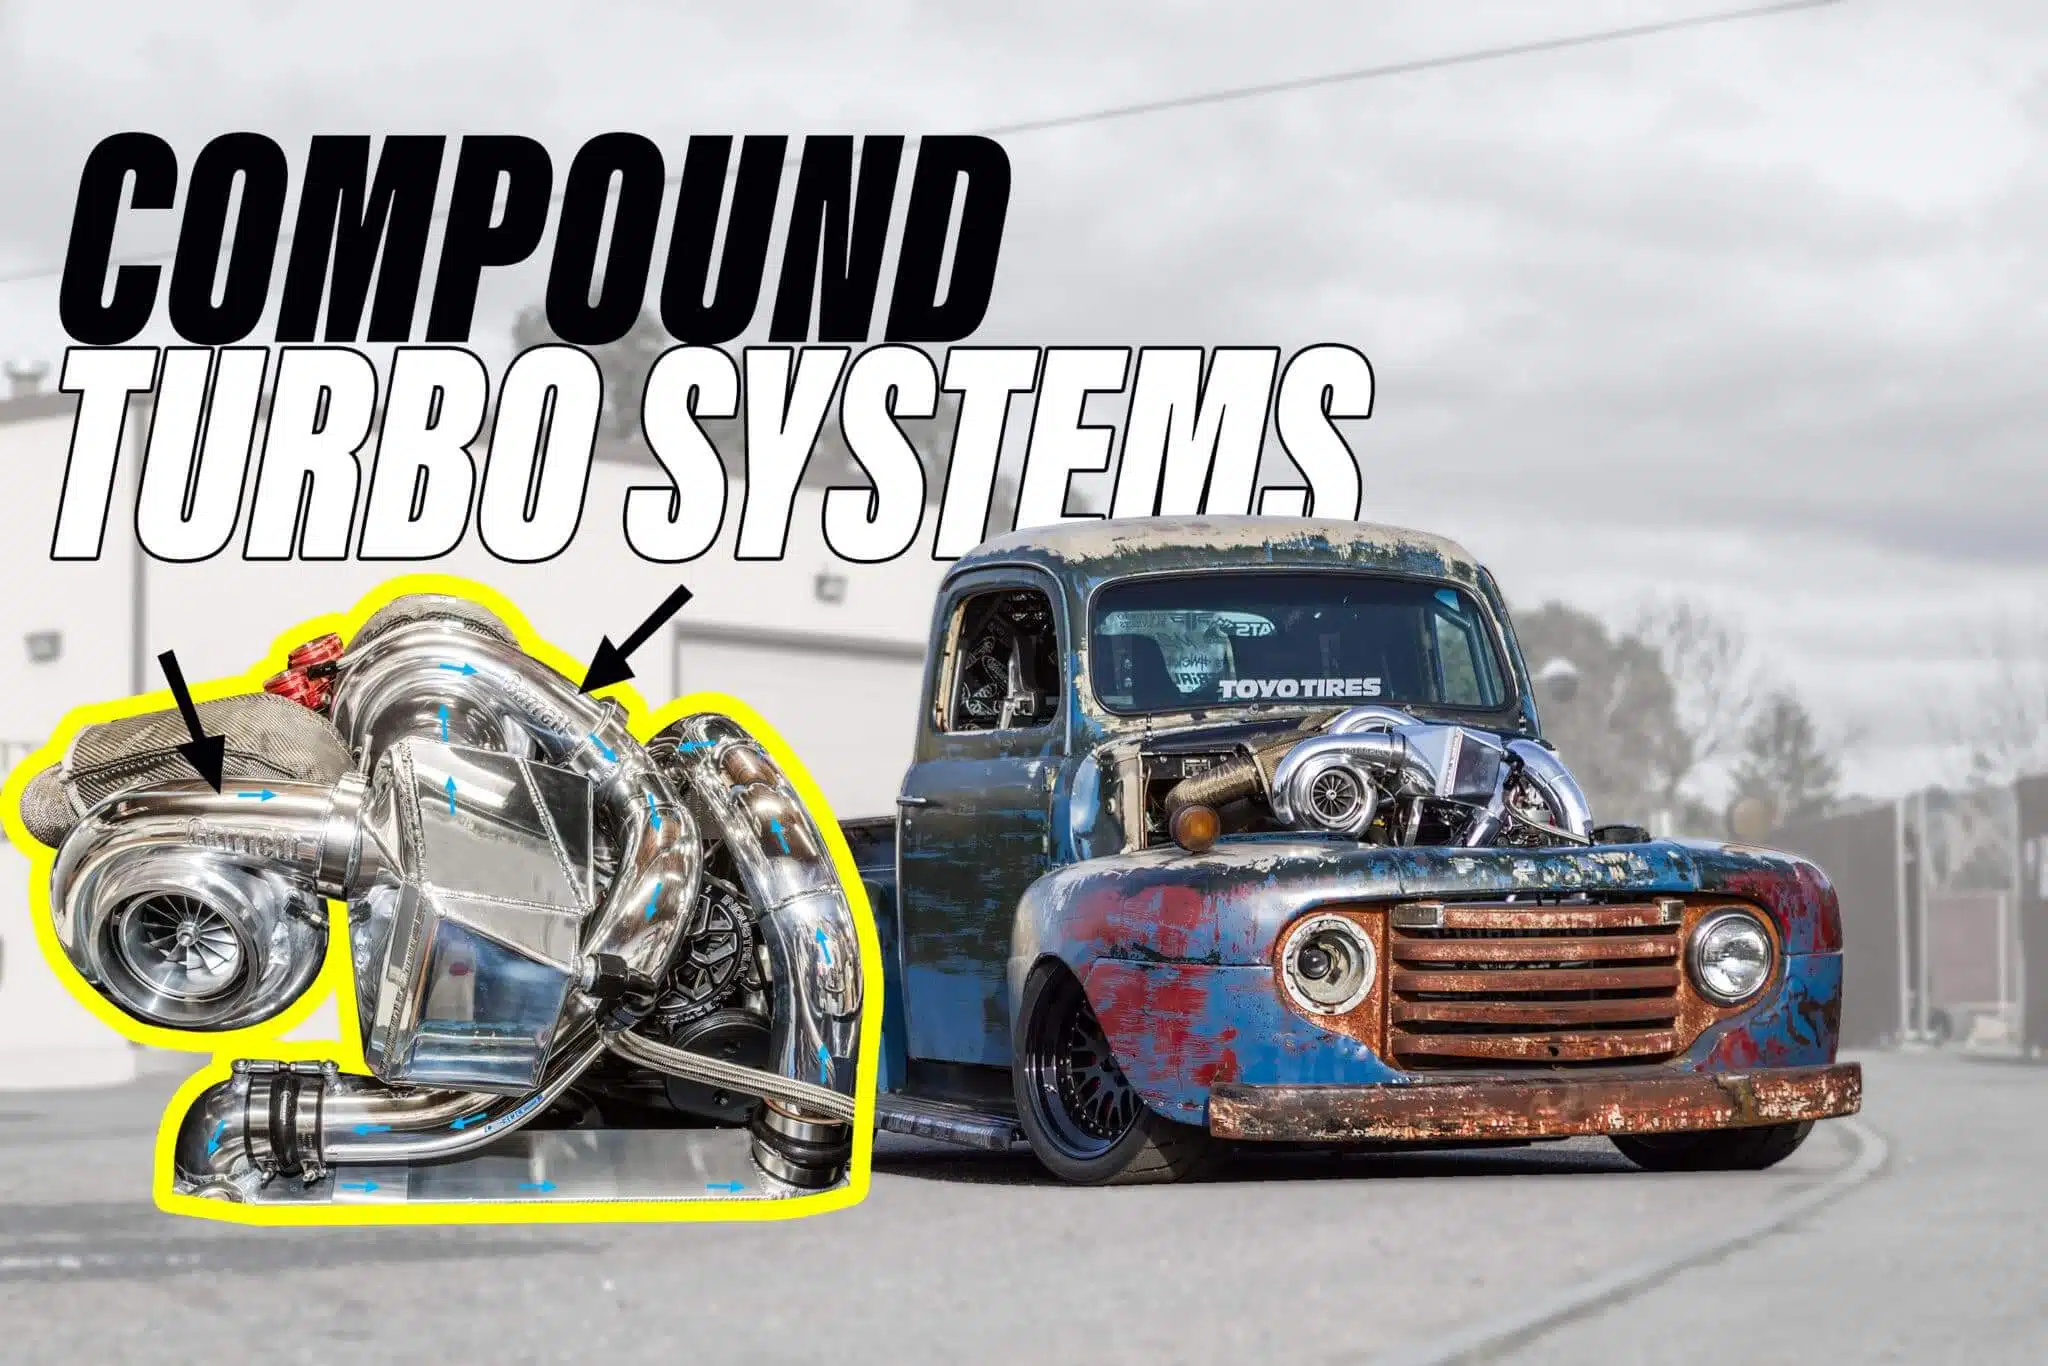 https://www.garrettmotion.com/news/newsroom/article/turbo-tech-compound-turbo-systems-multiplying-boost-for-racing-applications/garrett_performance_compound_turbo_system_title-1-scaled-2/